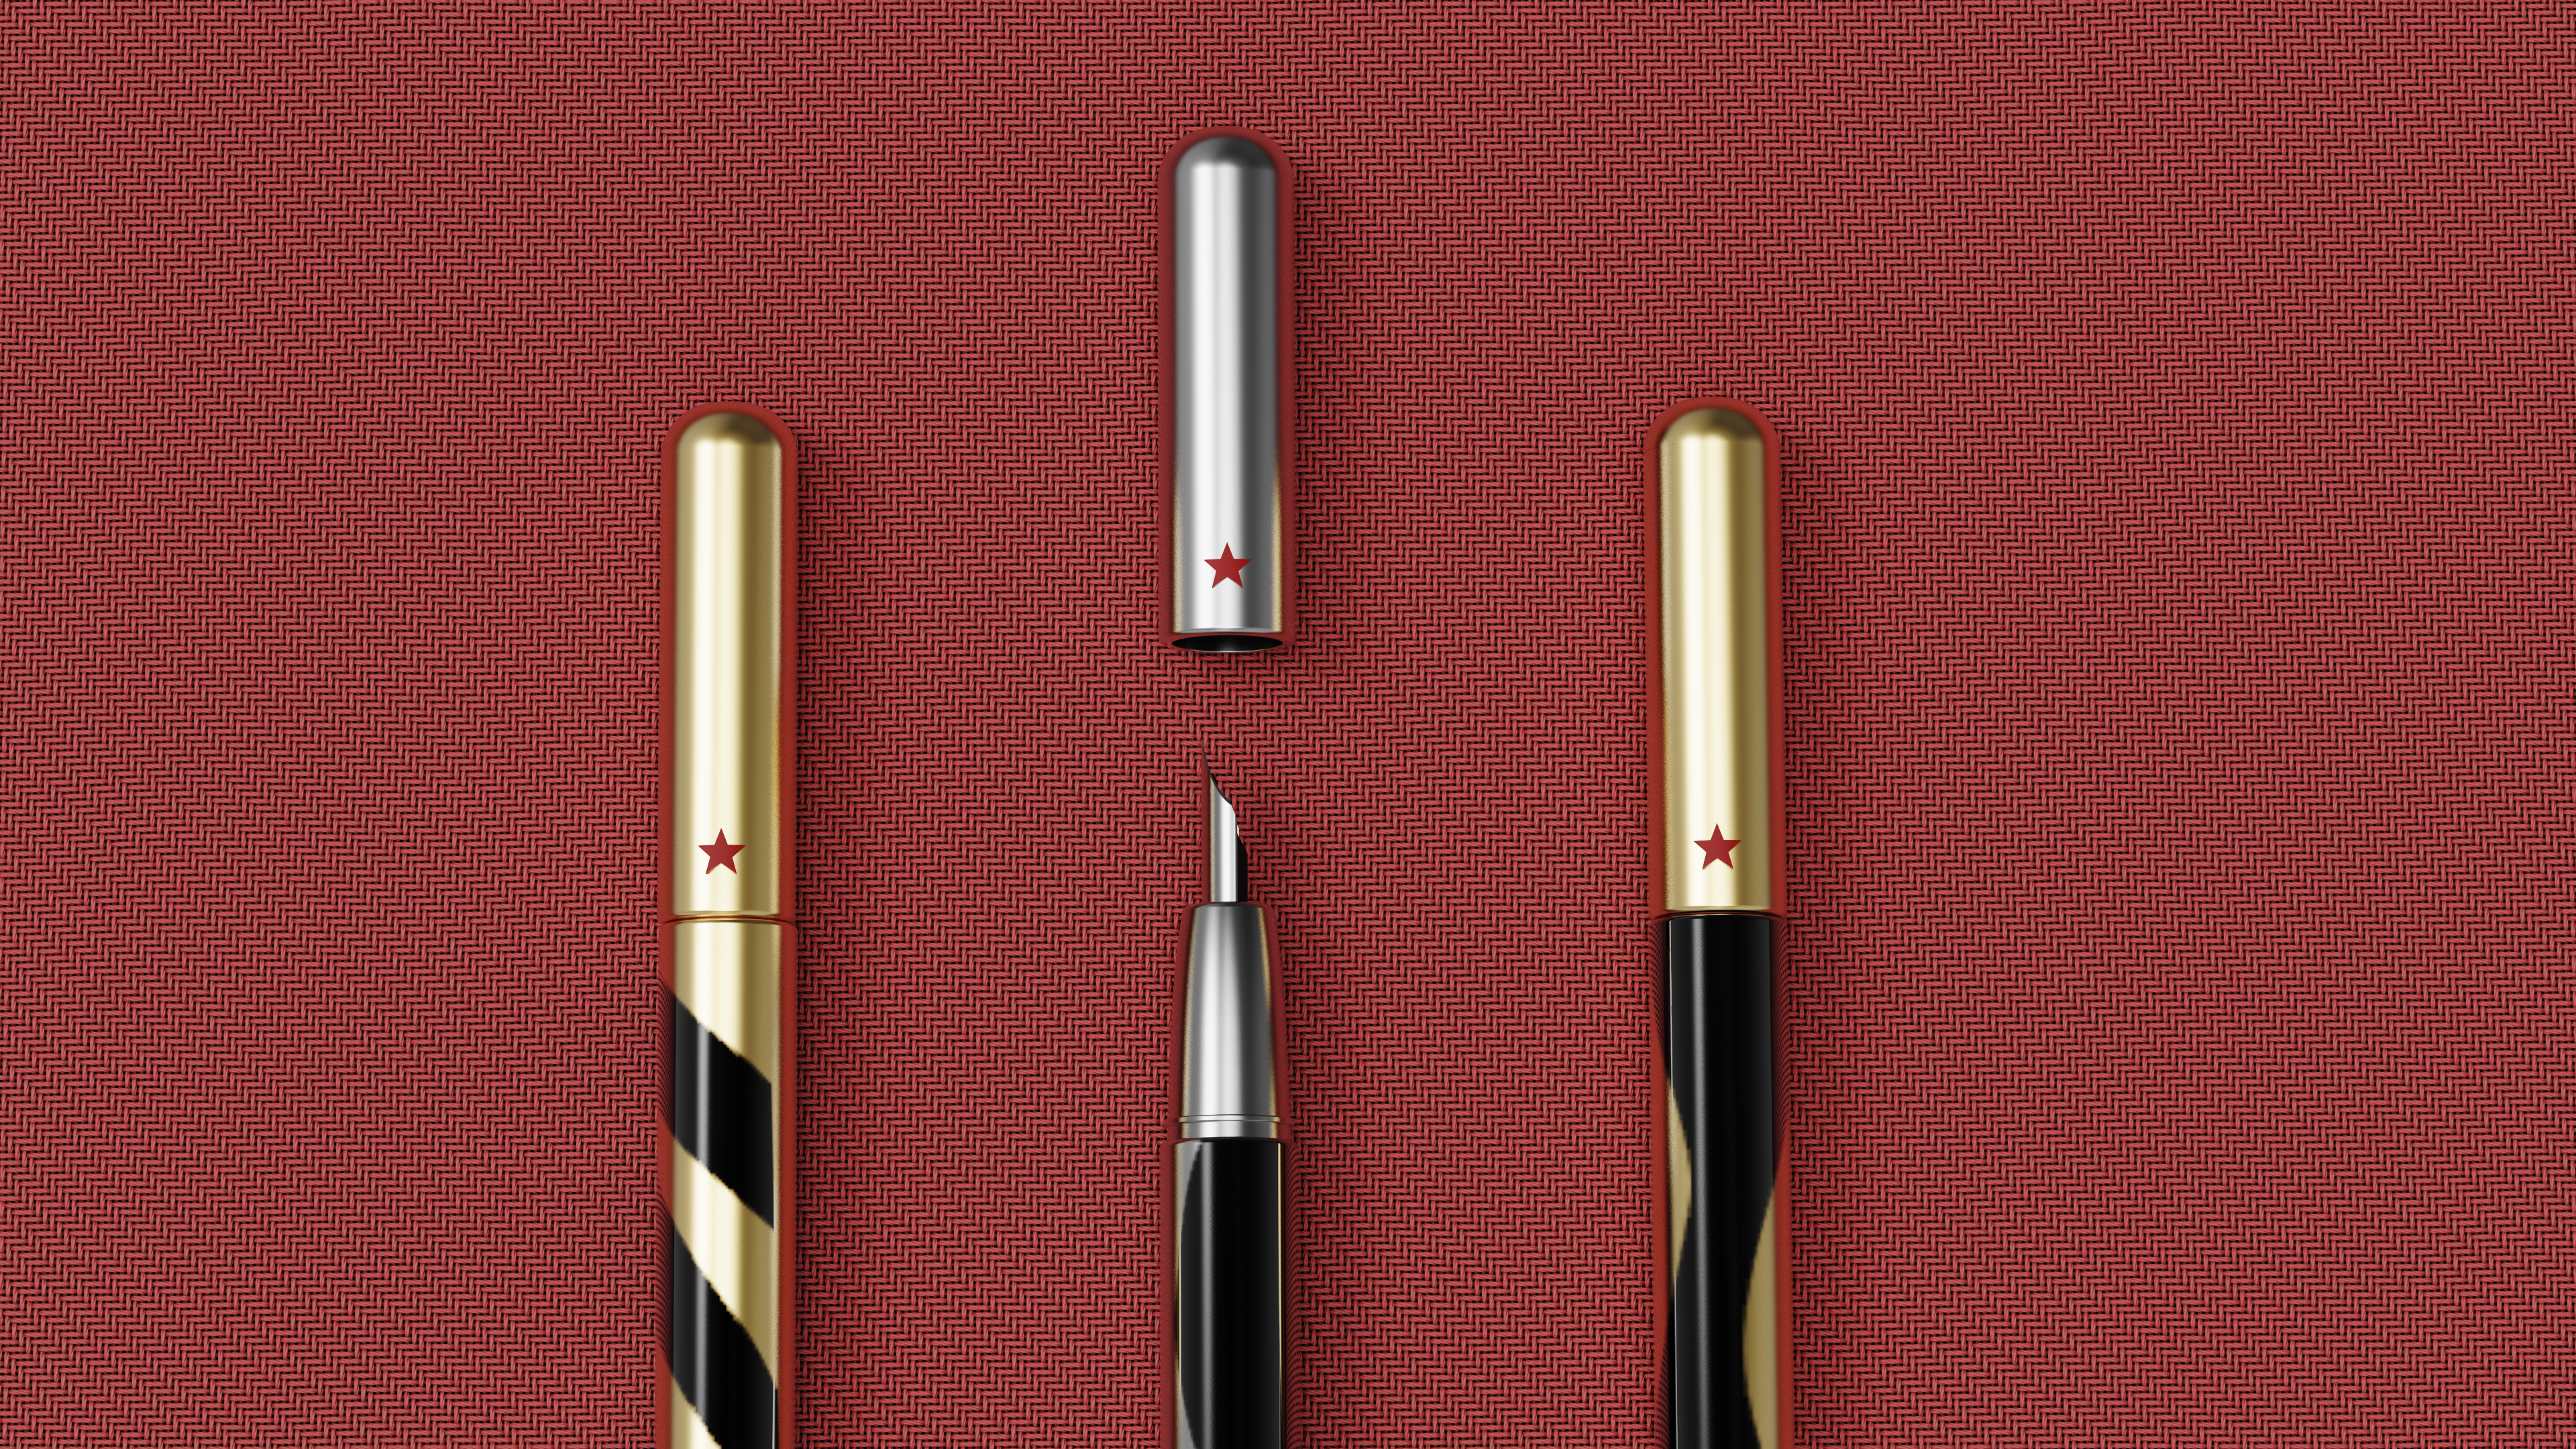 Red star pen